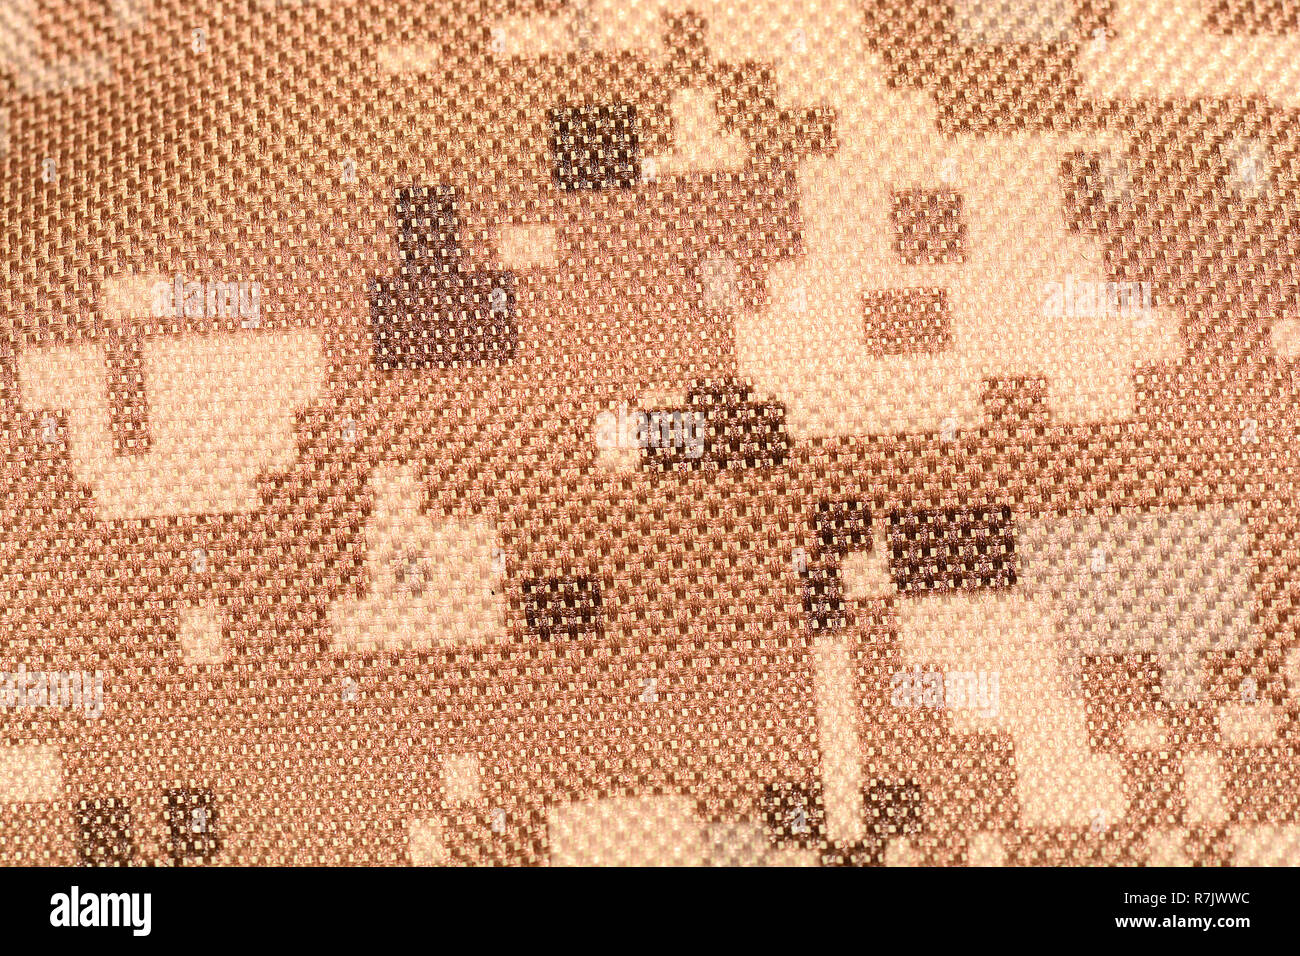 texture of old dirty camouflage pattern. close up Stock Photo